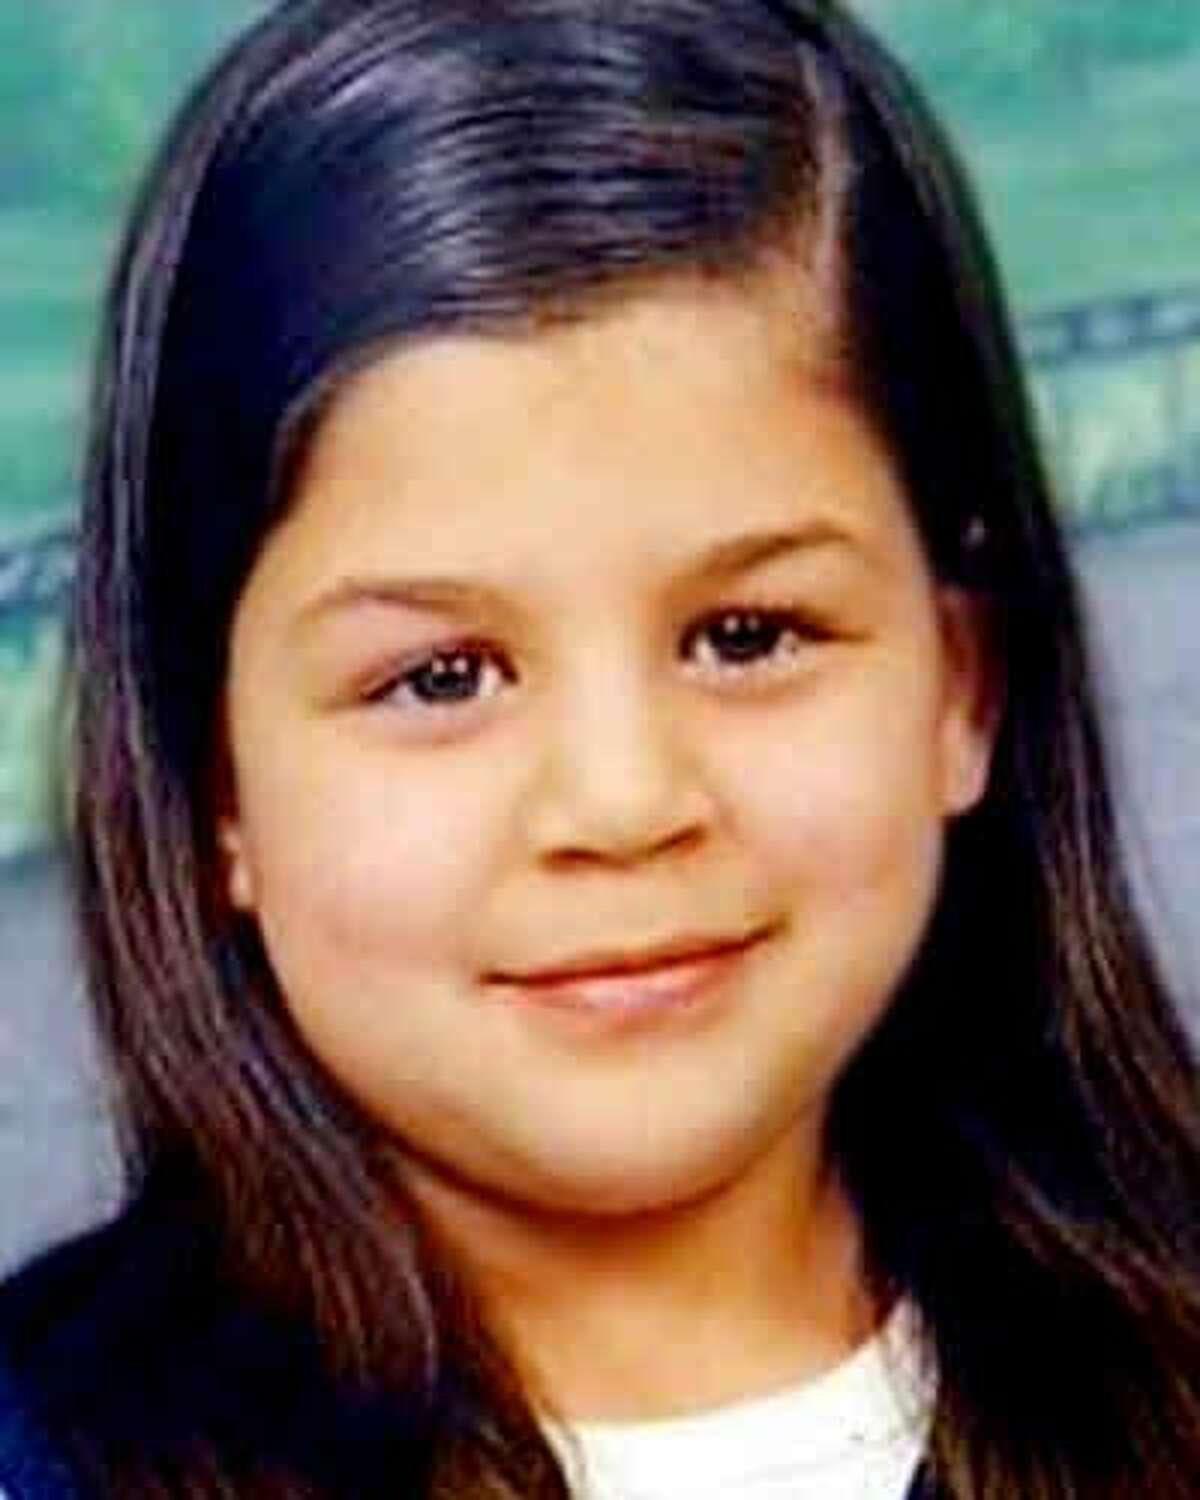 Police are still investigating the disappearance of Bianca Lebron, a 10-year-old who left school with a man she called her “uncle” on Nov. 7, 2001 and has not been seen since. She would now be 27 years old.